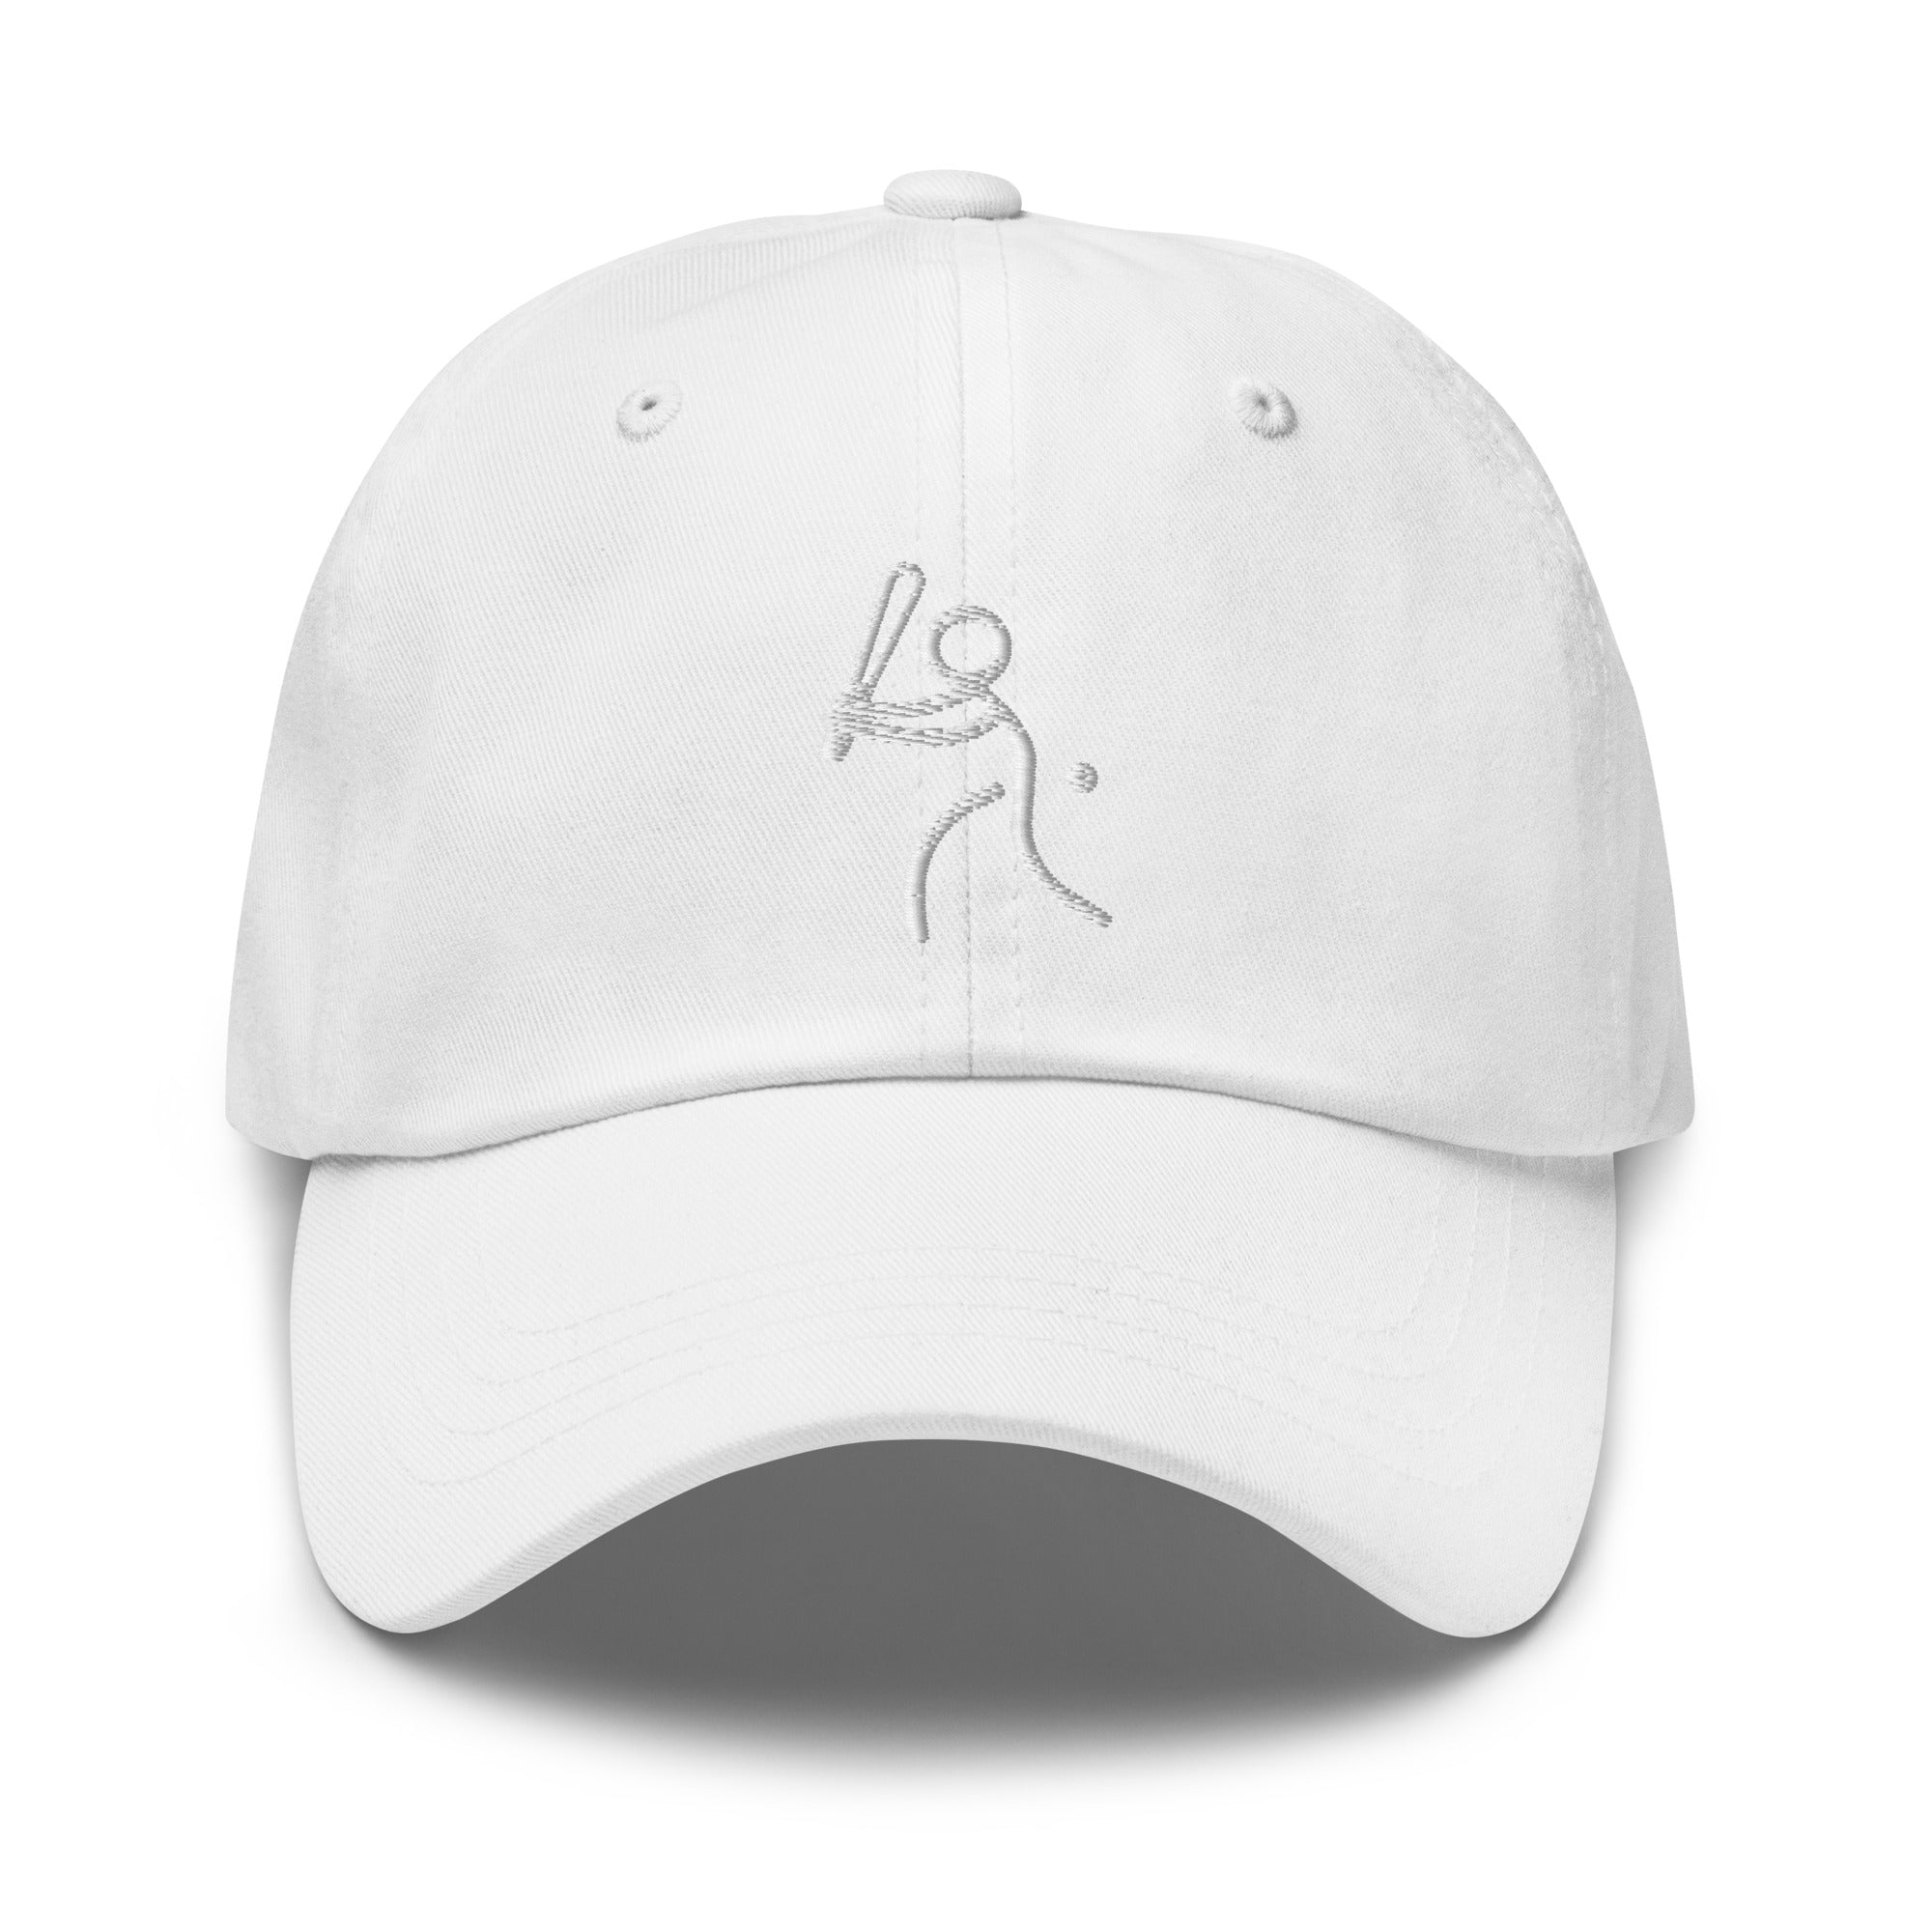 Do Great Things® Baseball Dad hat